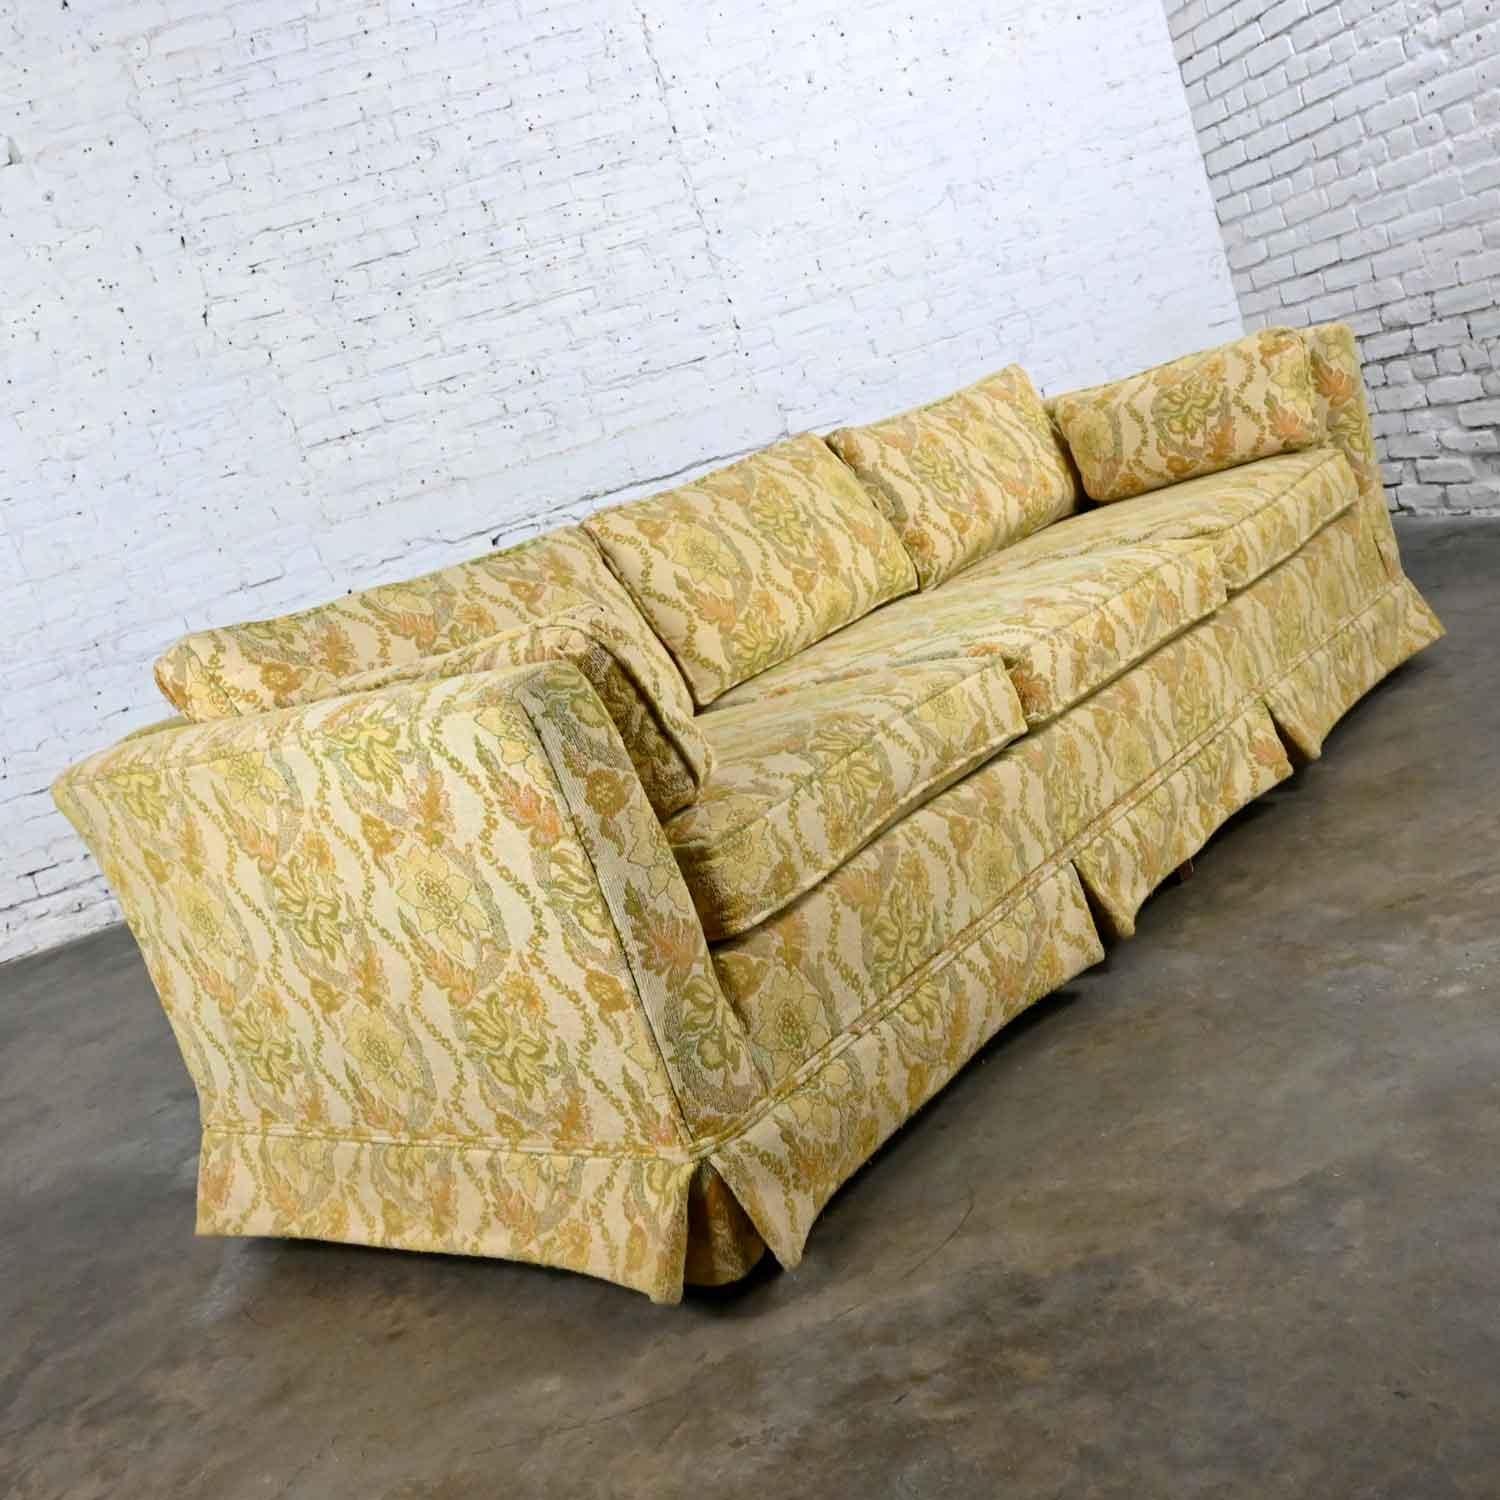 Fantastic vintage MCM (a.k.a.) mid-century modern Broyhill Furniture flared tuxedo style sofa with light yellow floral tapestry fabric by Lenoir Chair Co. Beautiful condition, keeping in mind that this is vintage and not new so will have signs of